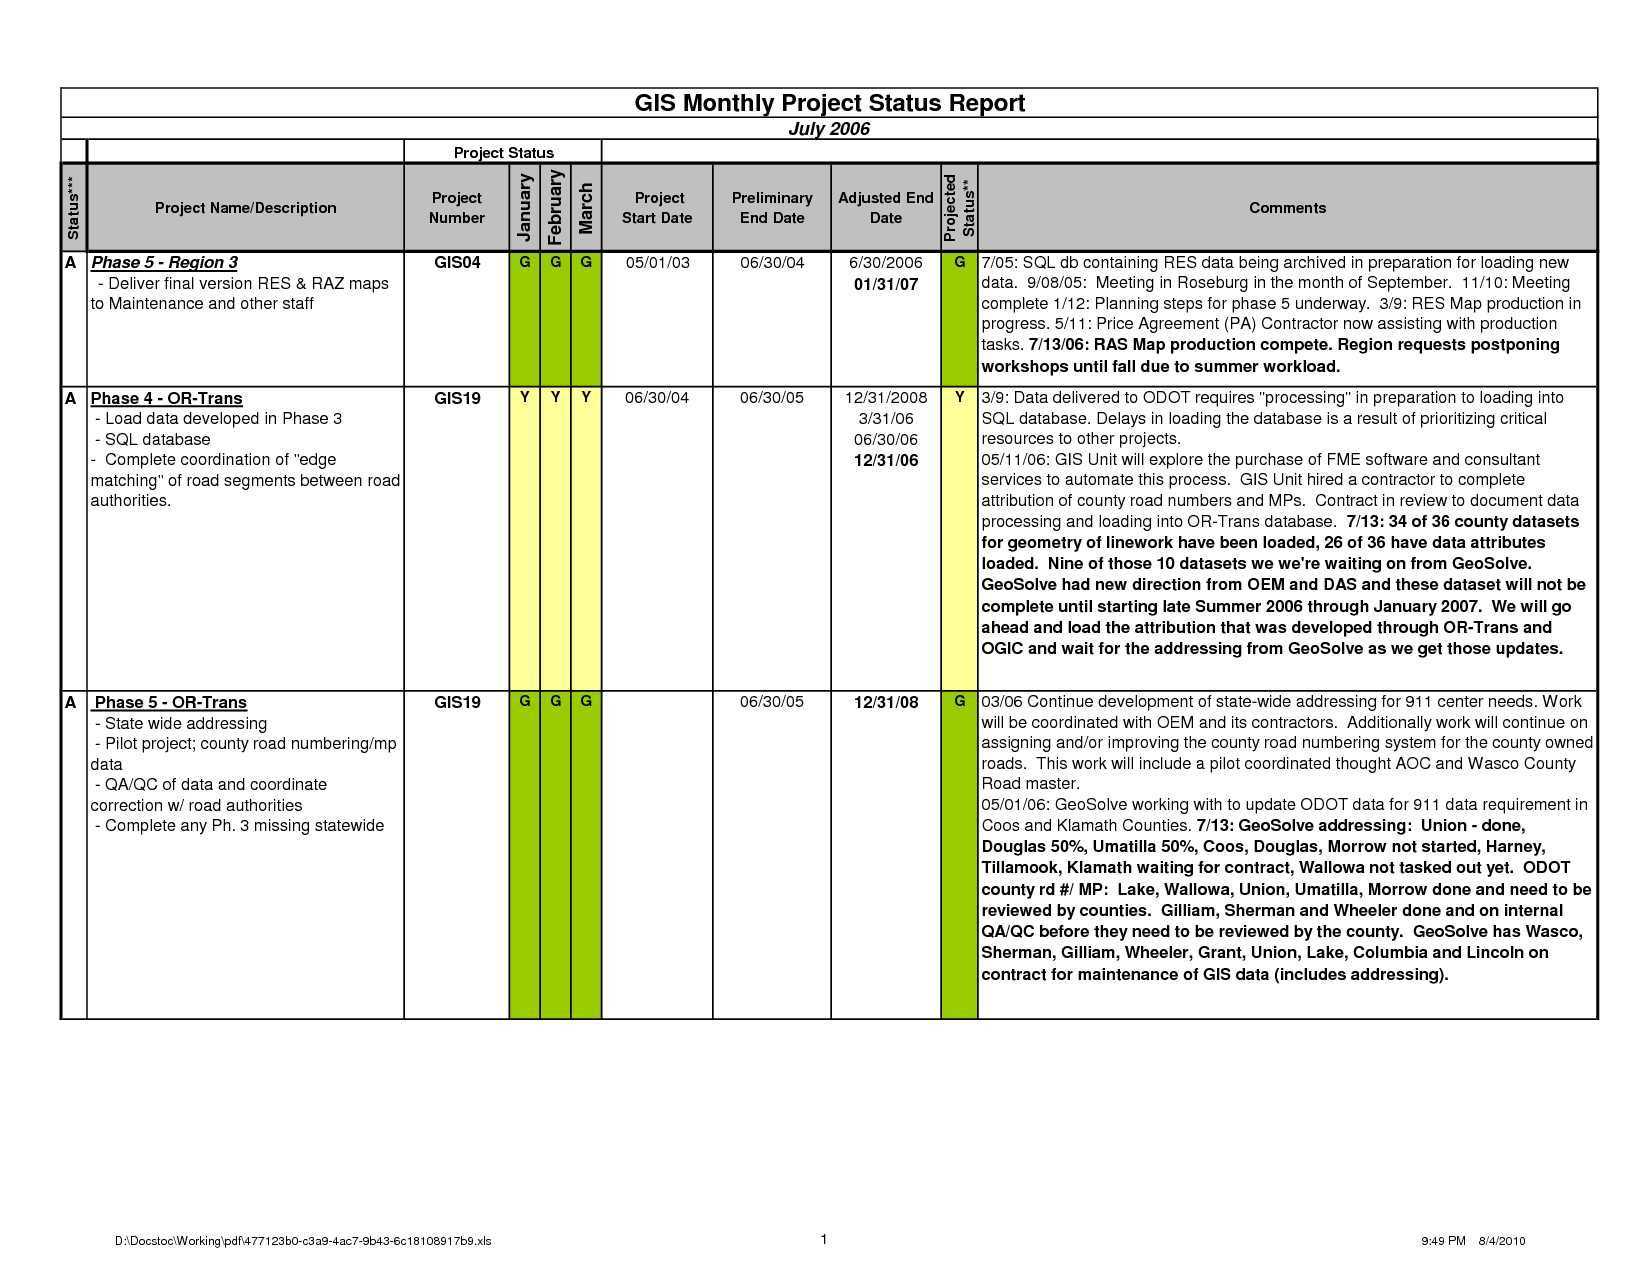 001 Status Report Template Excel Frightening Ideas Work Throughout Daily Project Status Report Template